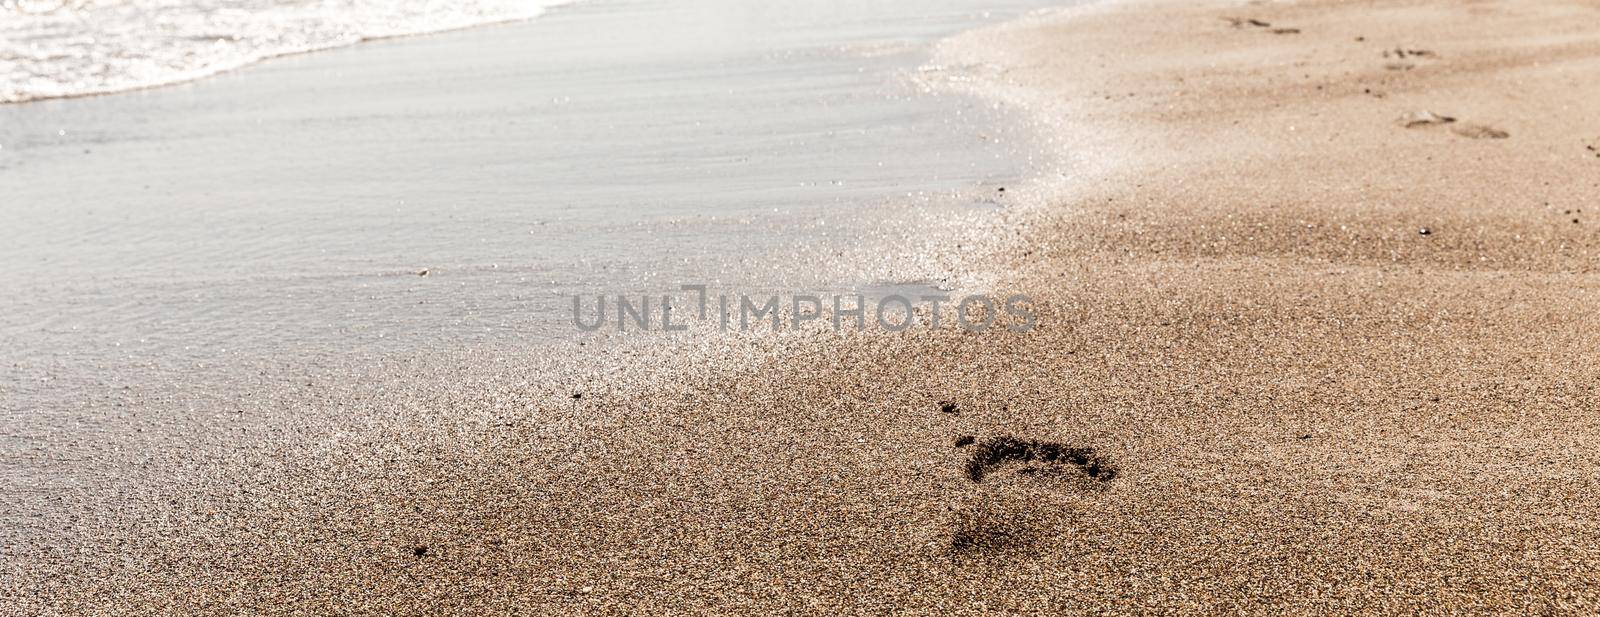 Footprints in the sand by Mariakray